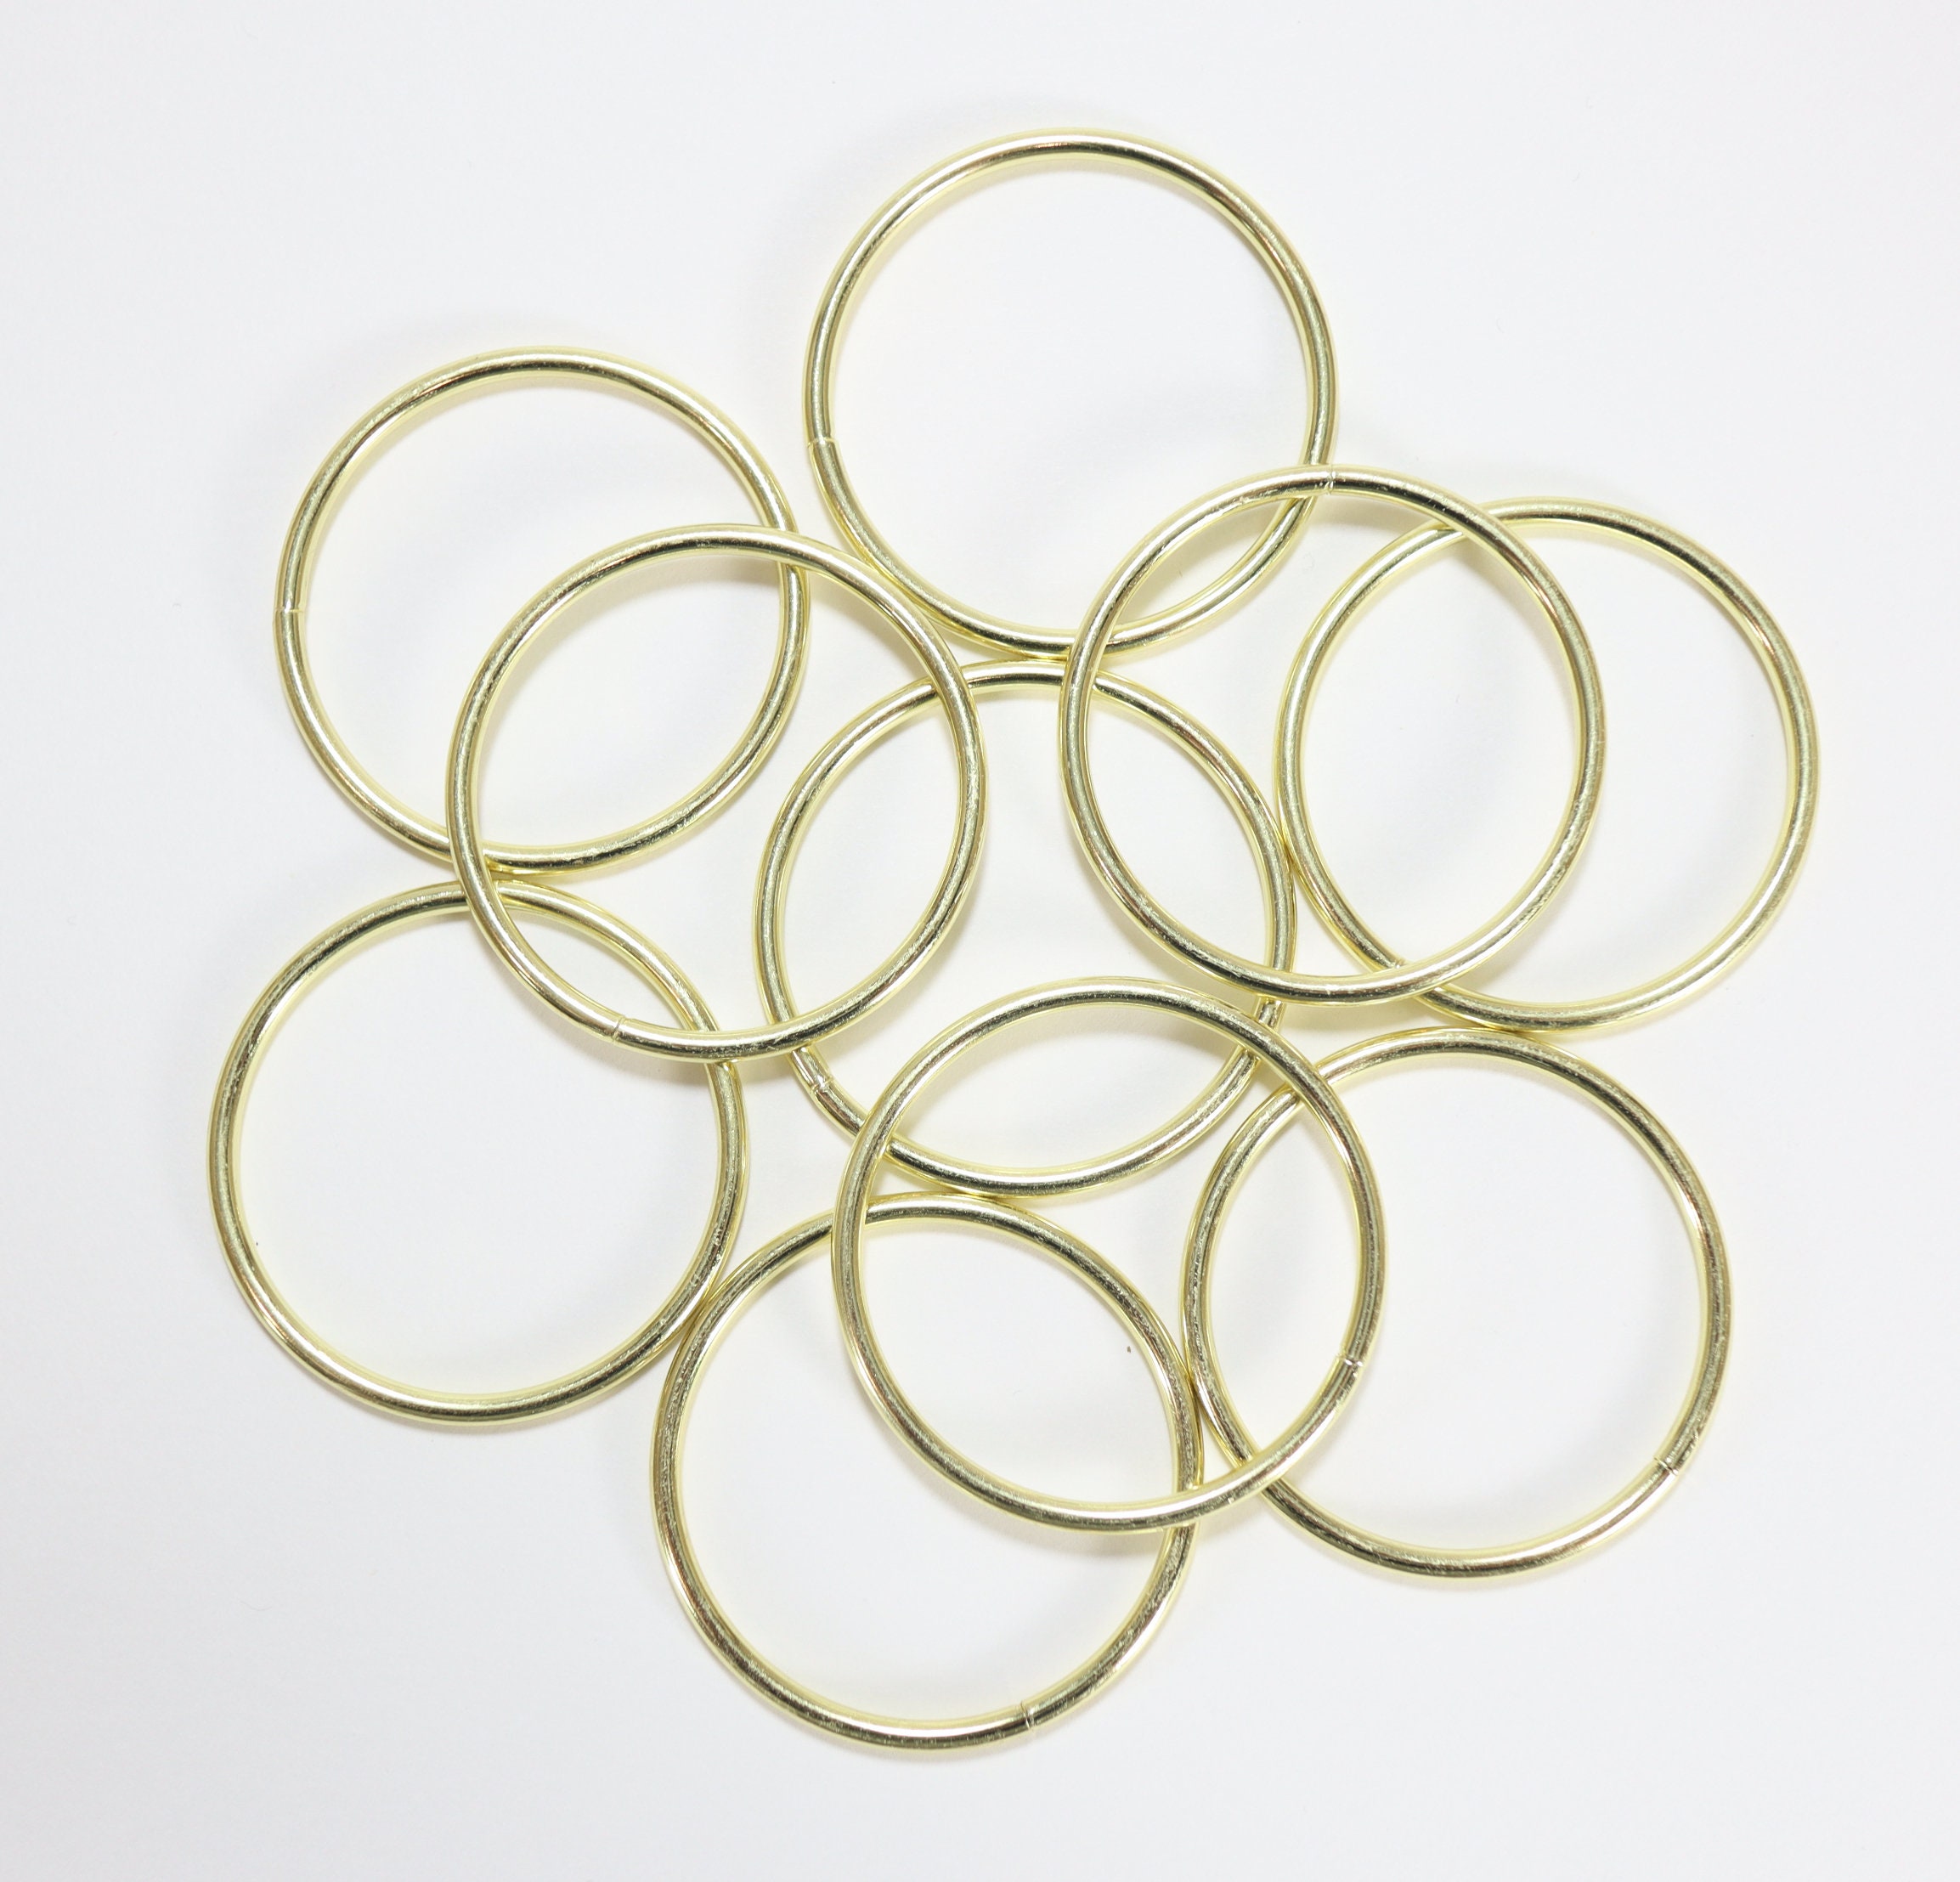 5 Inch Gold Metal Rings Hoops for Crafts Bulk Wholesale 12 